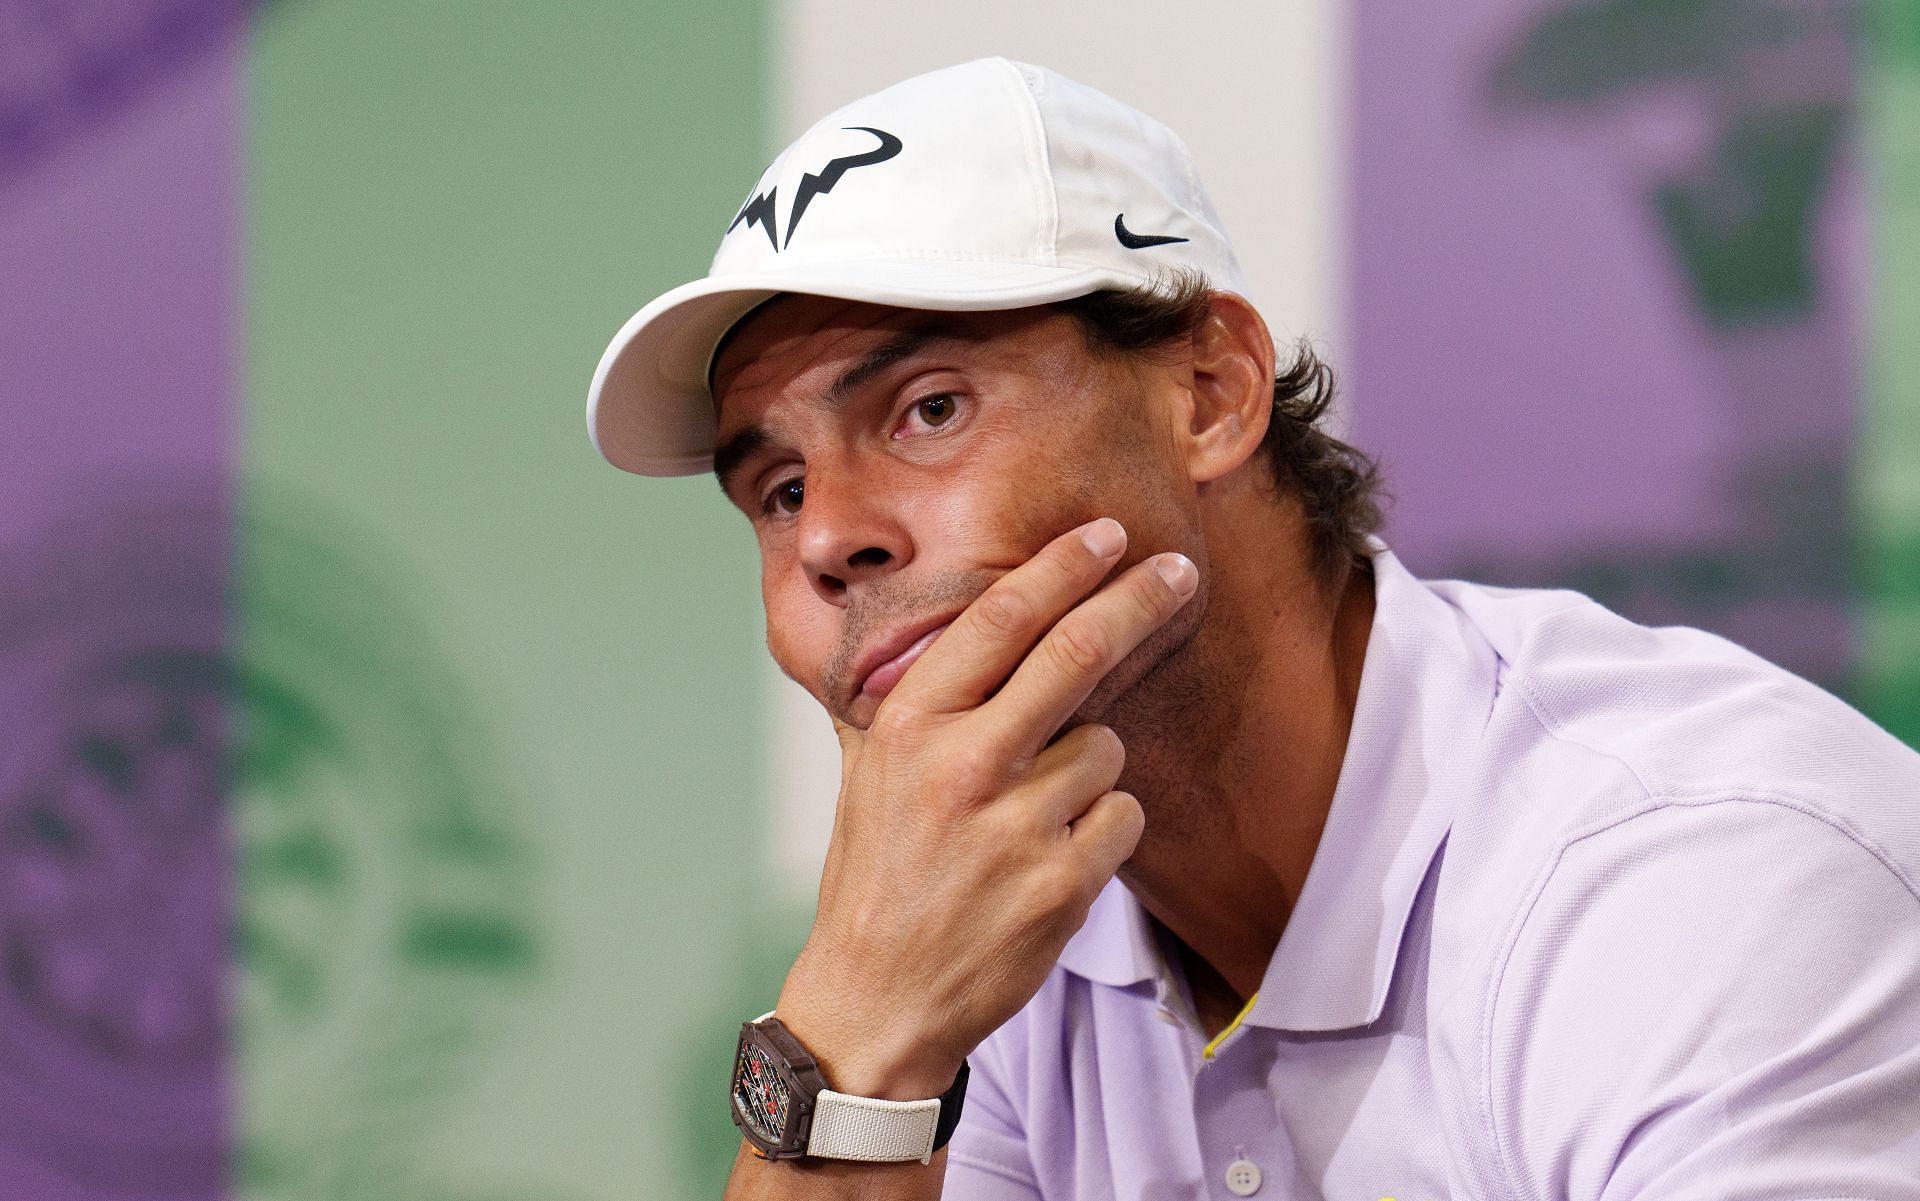 Nadal during a press conference on Day 11 of The Championships - Wimbledon 2022